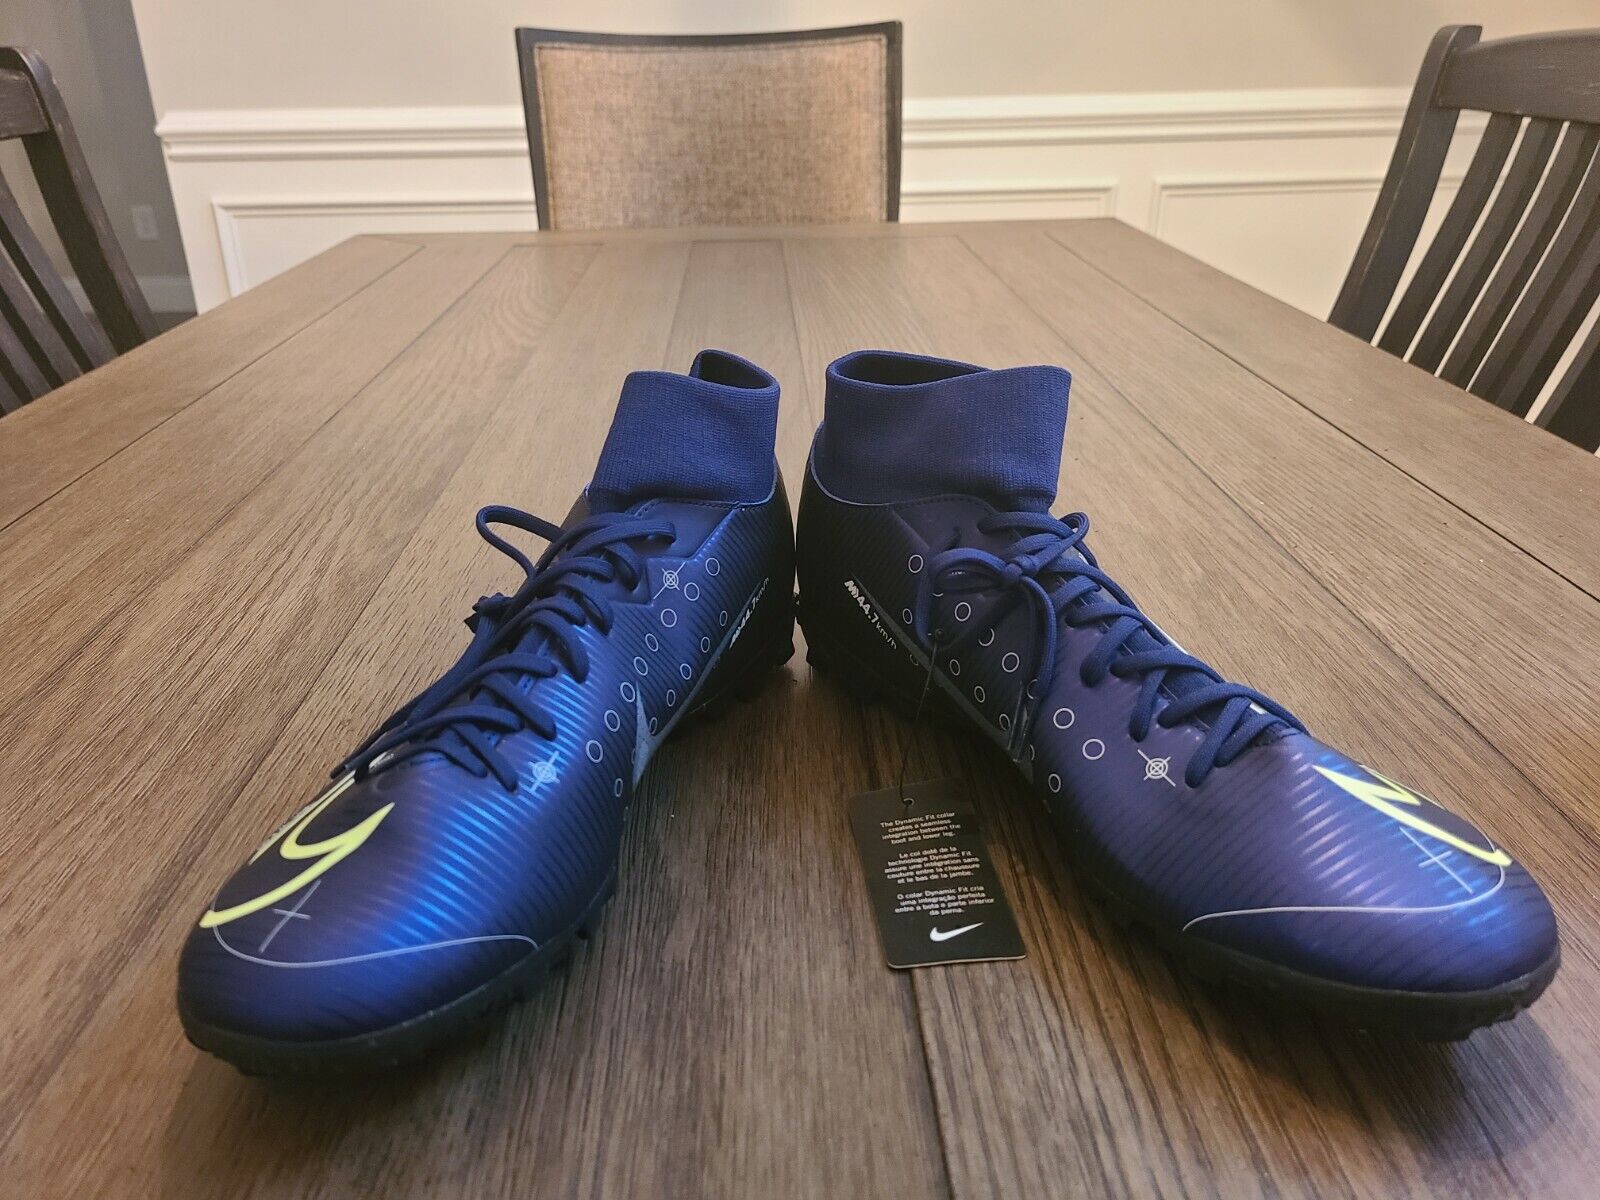 Nike Mercurial Superfly 7 Academy MDS Football Clea TF Soccer online Max 64% OFF shop 12